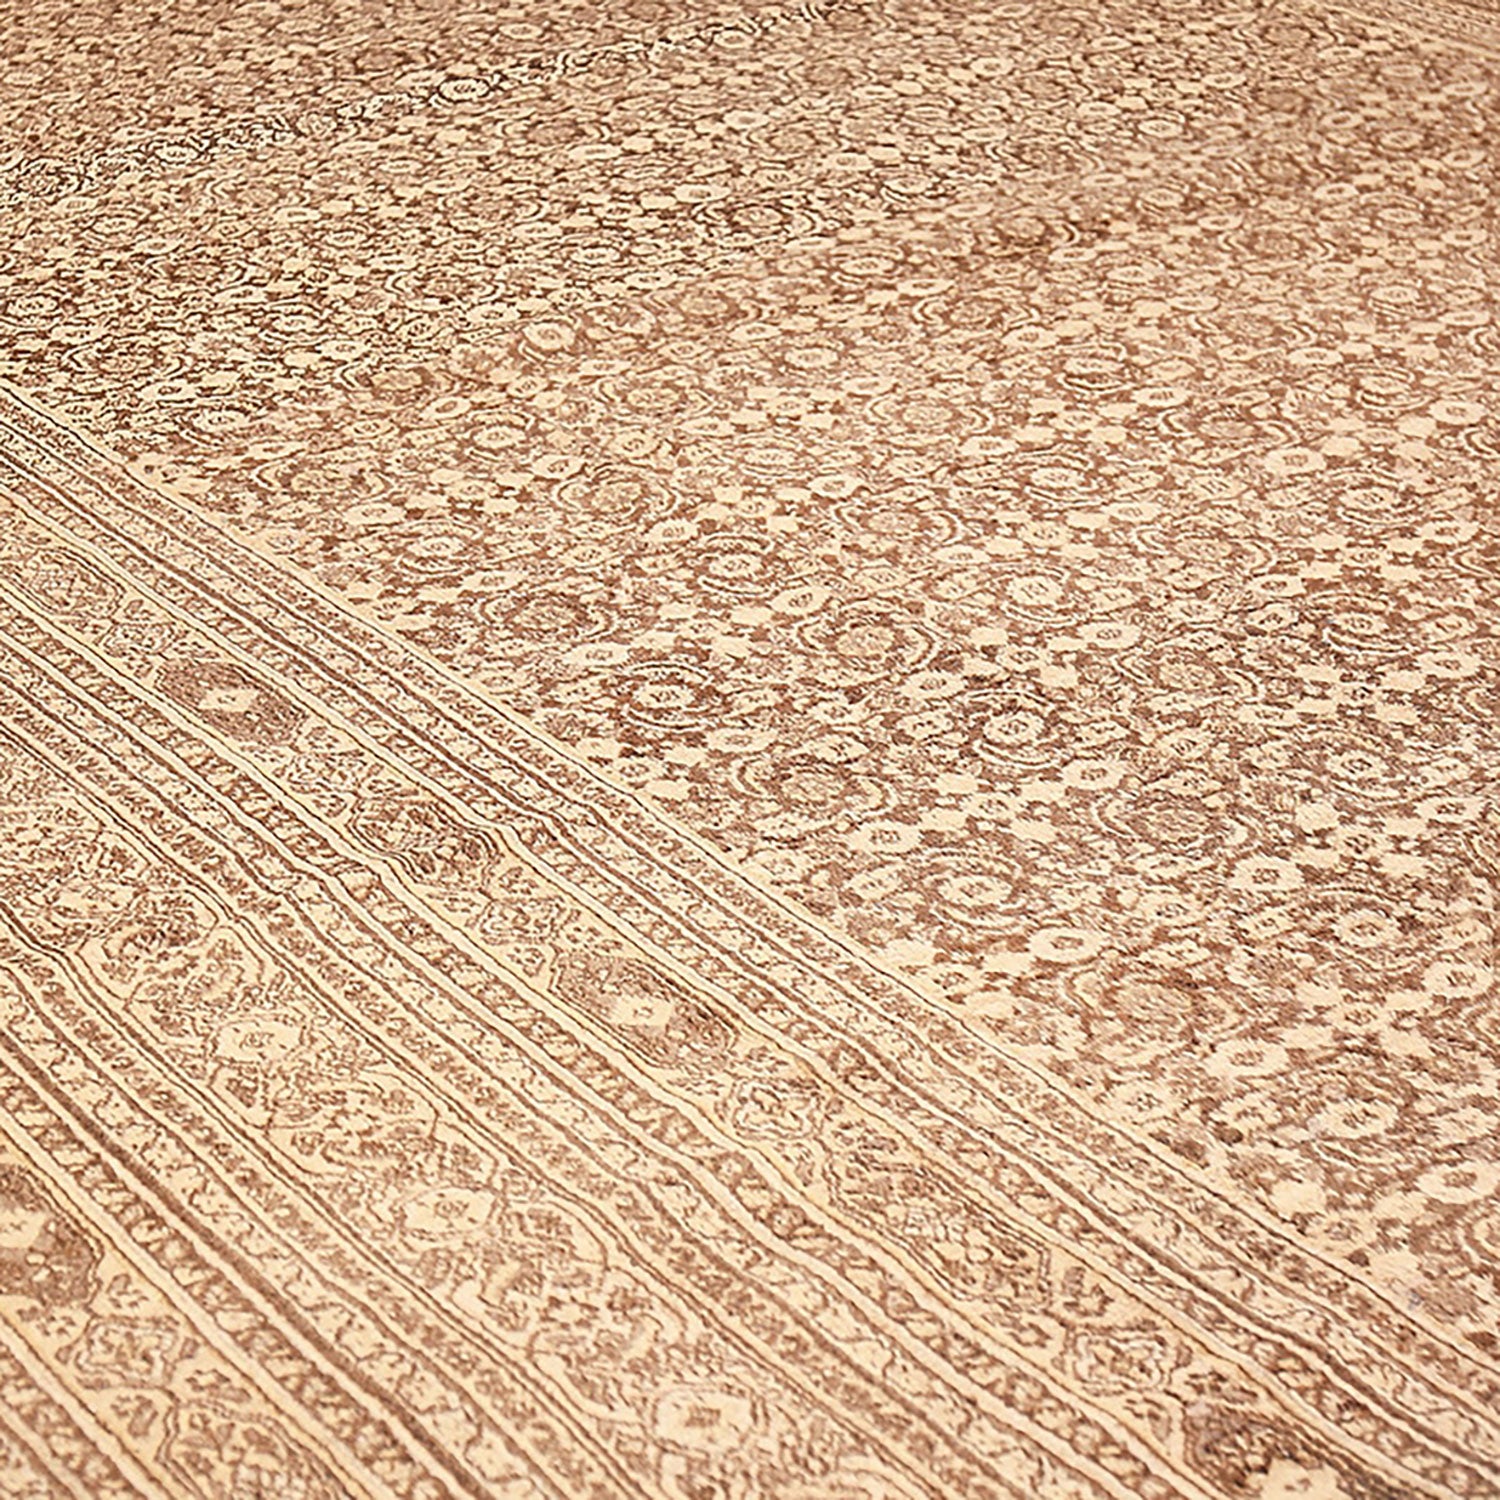 An intricately patterned, high-quality carpet with elegant floral motifs.